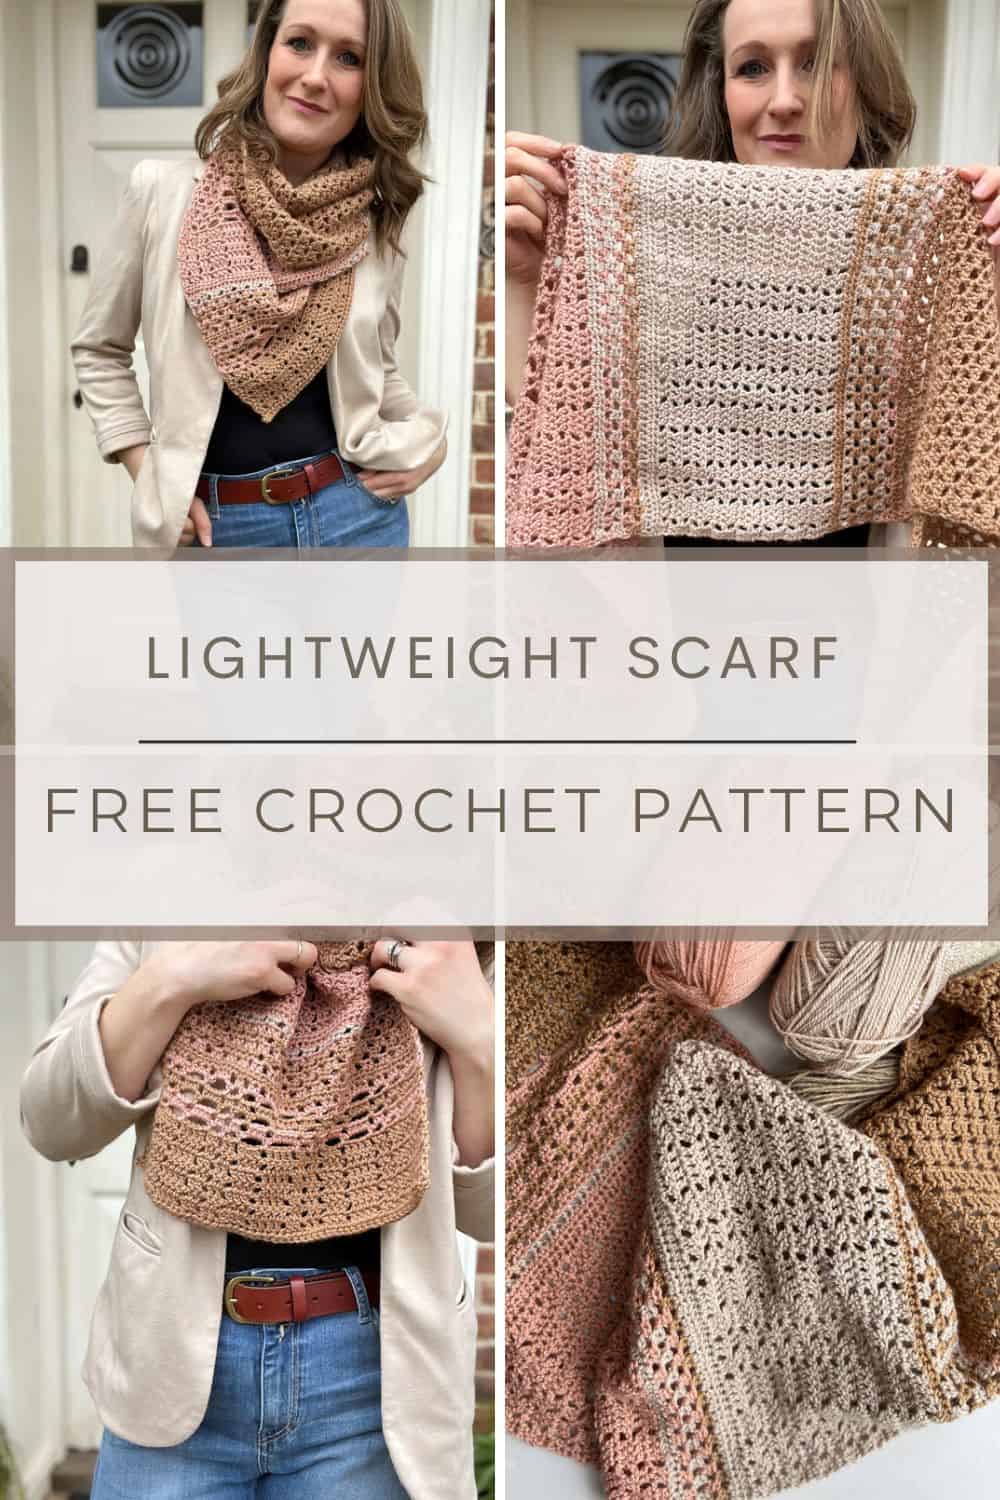 Lightweight crochet scarf pattern shown in four images.